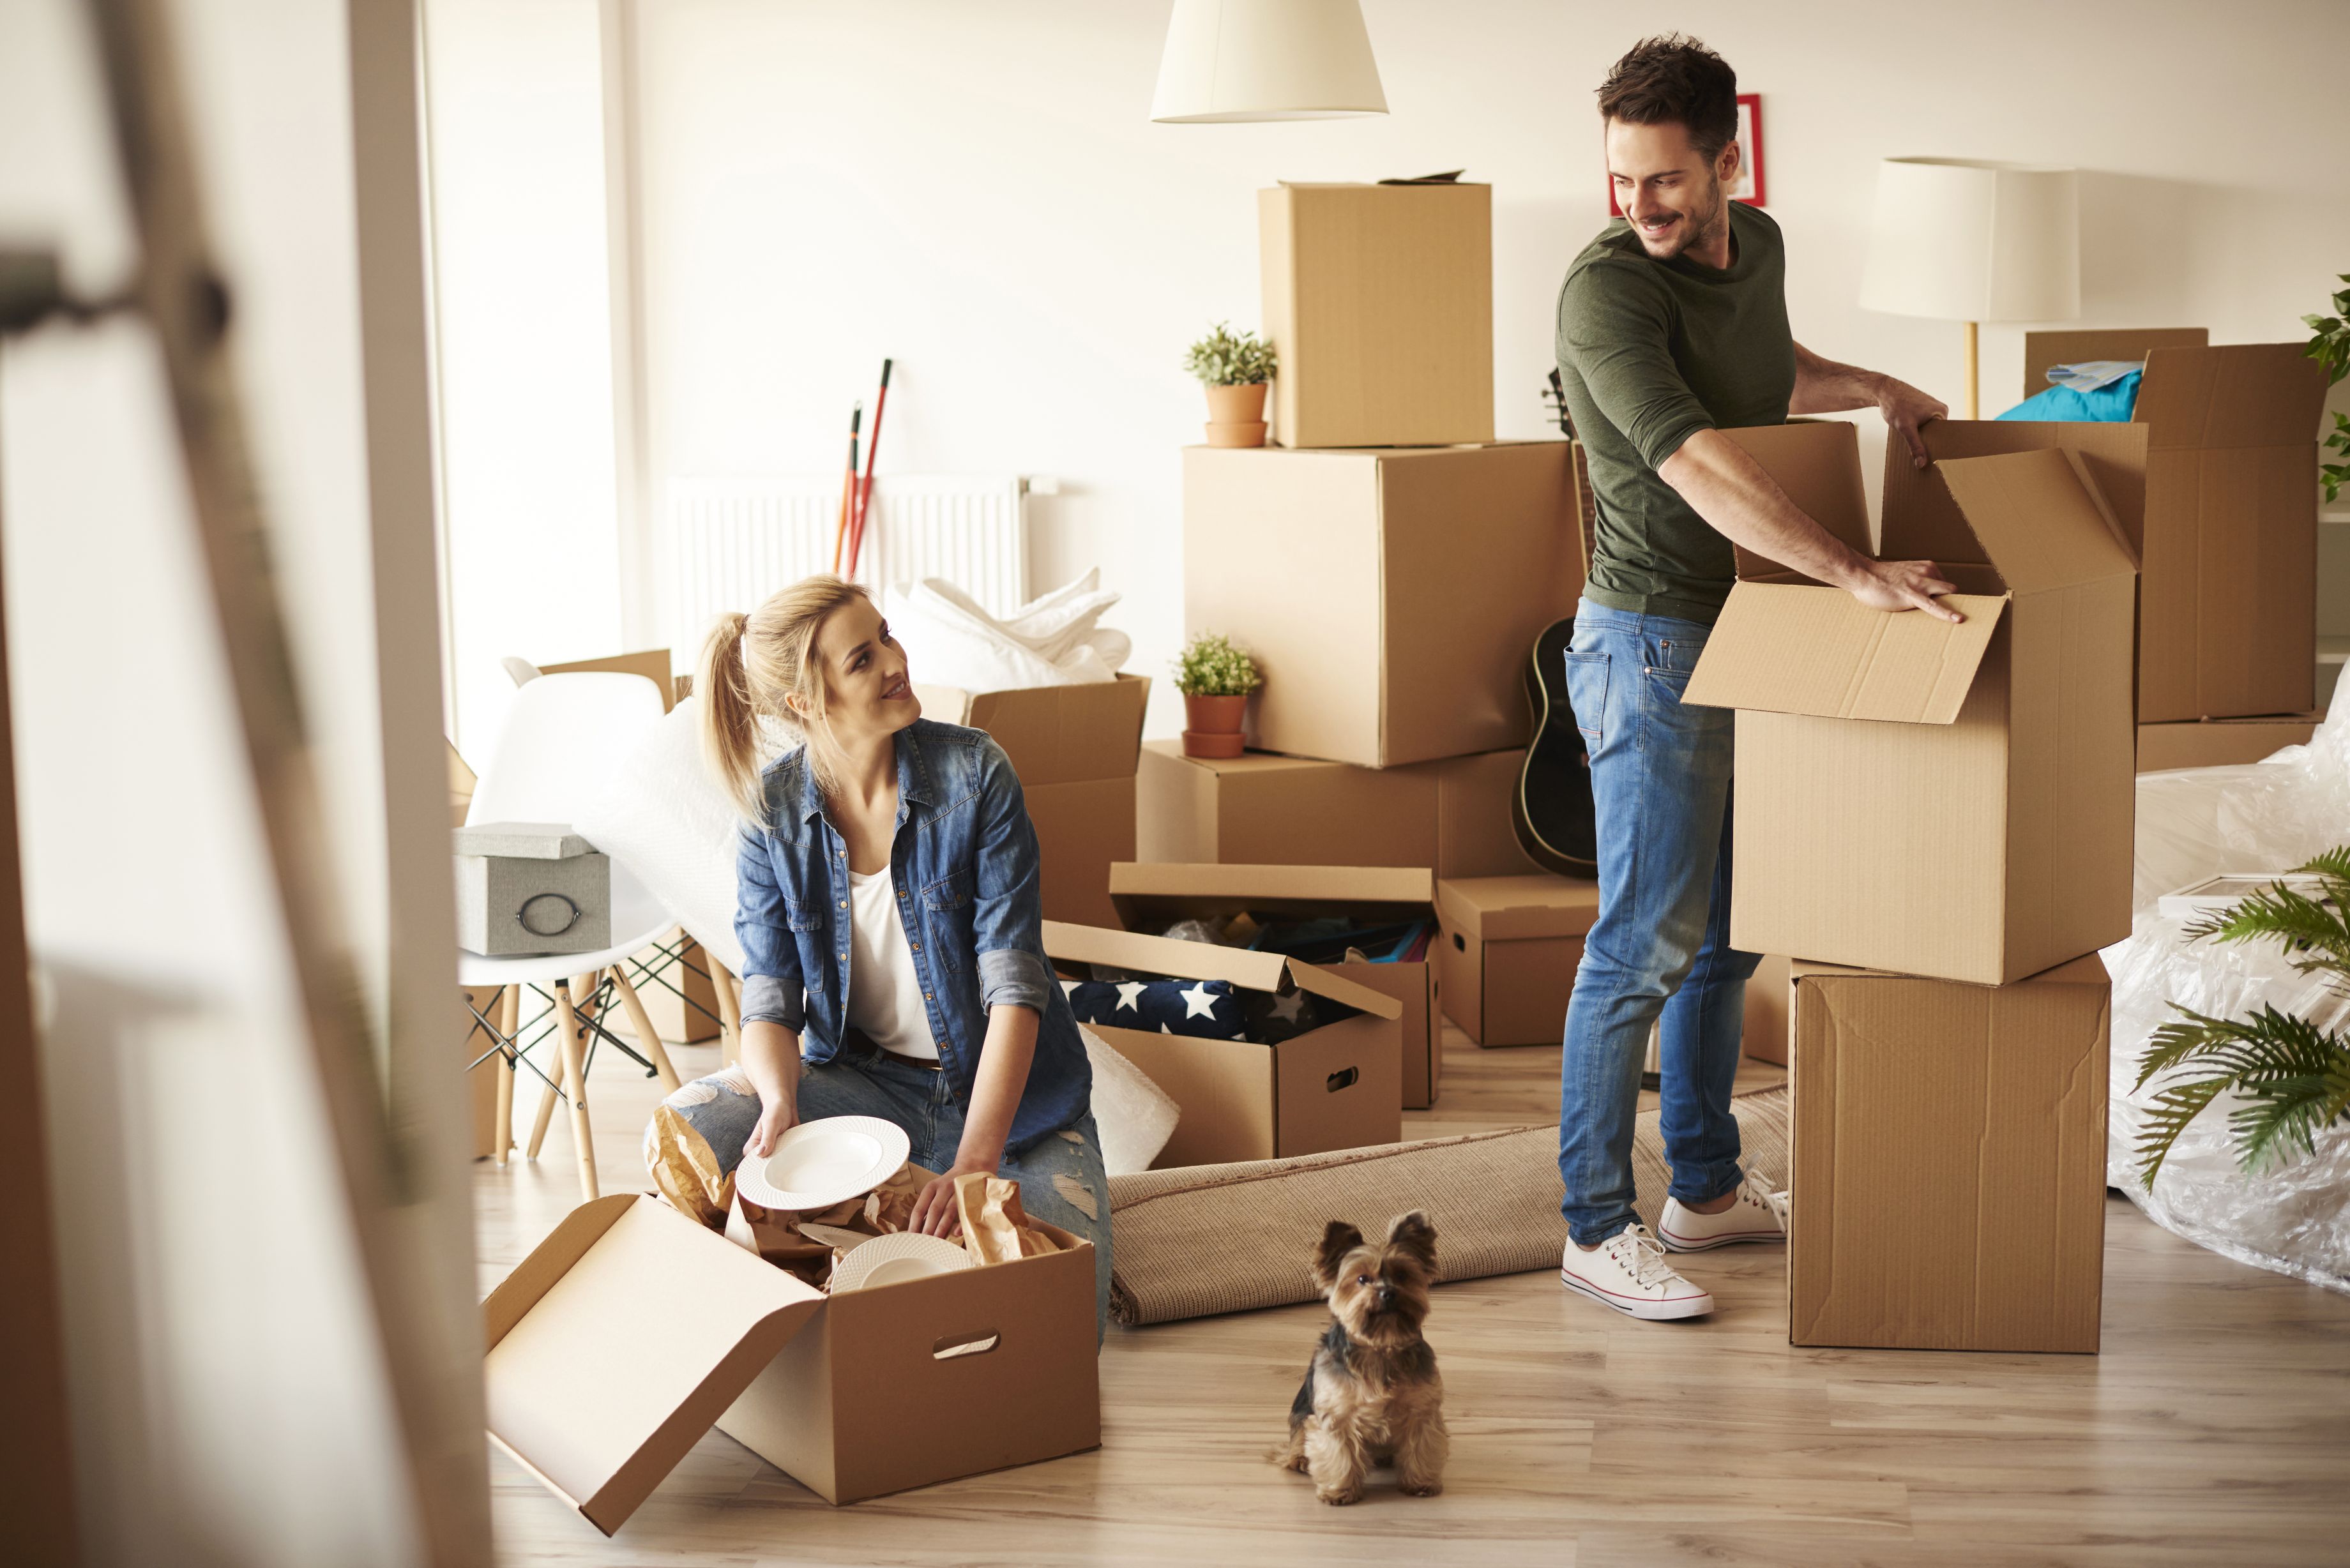 Finding Reliable Moving Companies And Avoiding Scams | SmartGuy